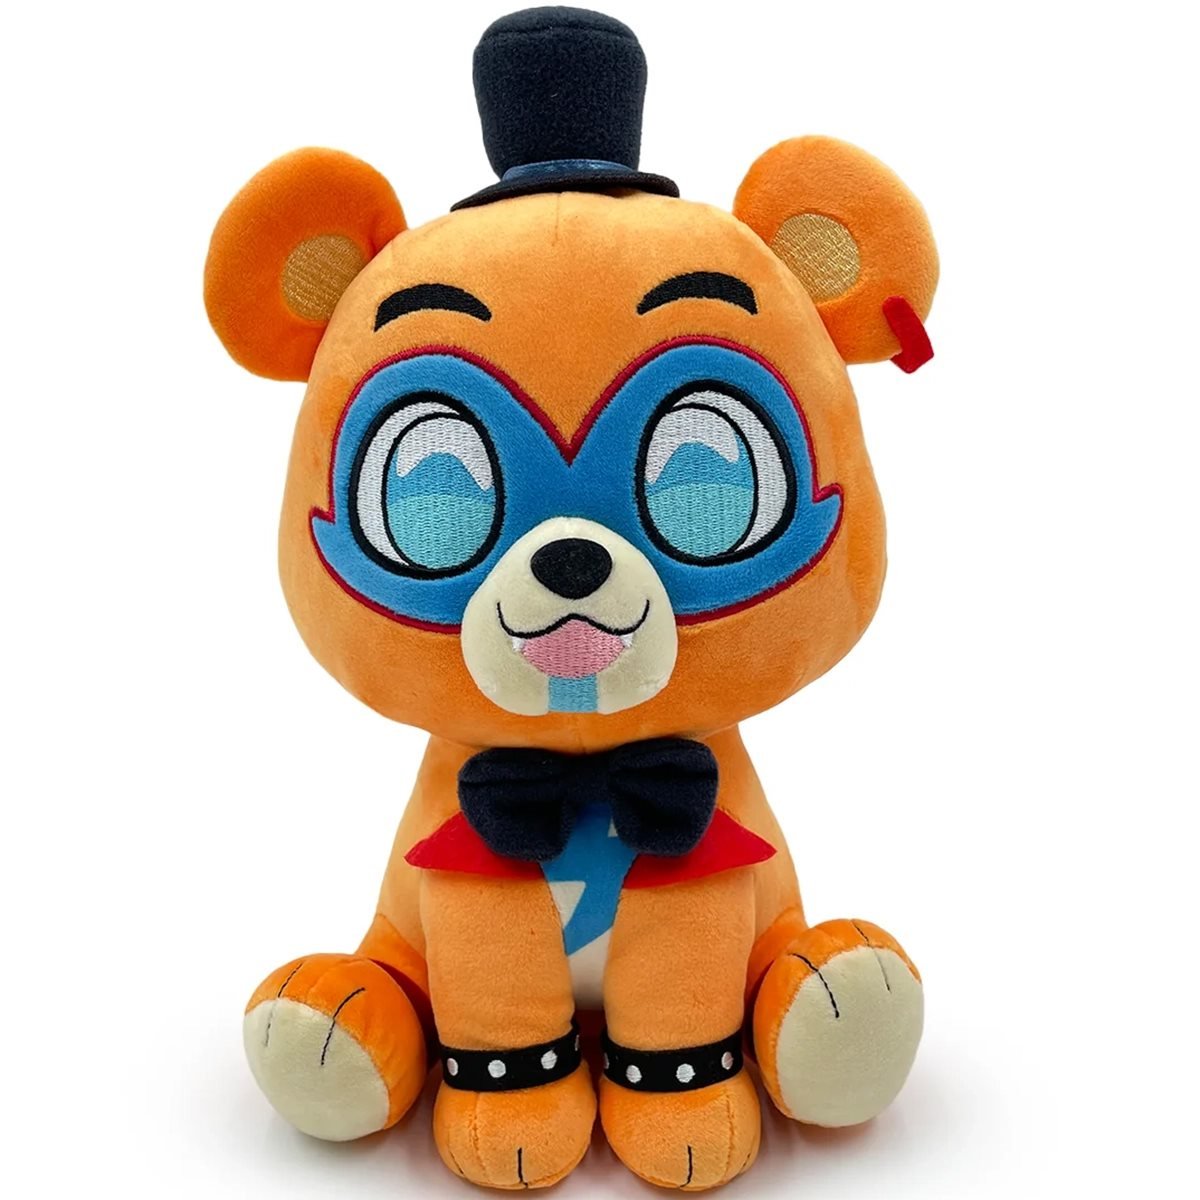 Youtooz Chibi Freddy Plush 9 inch, Collectible Plush Stuffed Animal from  Five Nights at Freddy's (Exclusive) by The Youtooz FNAF Collection